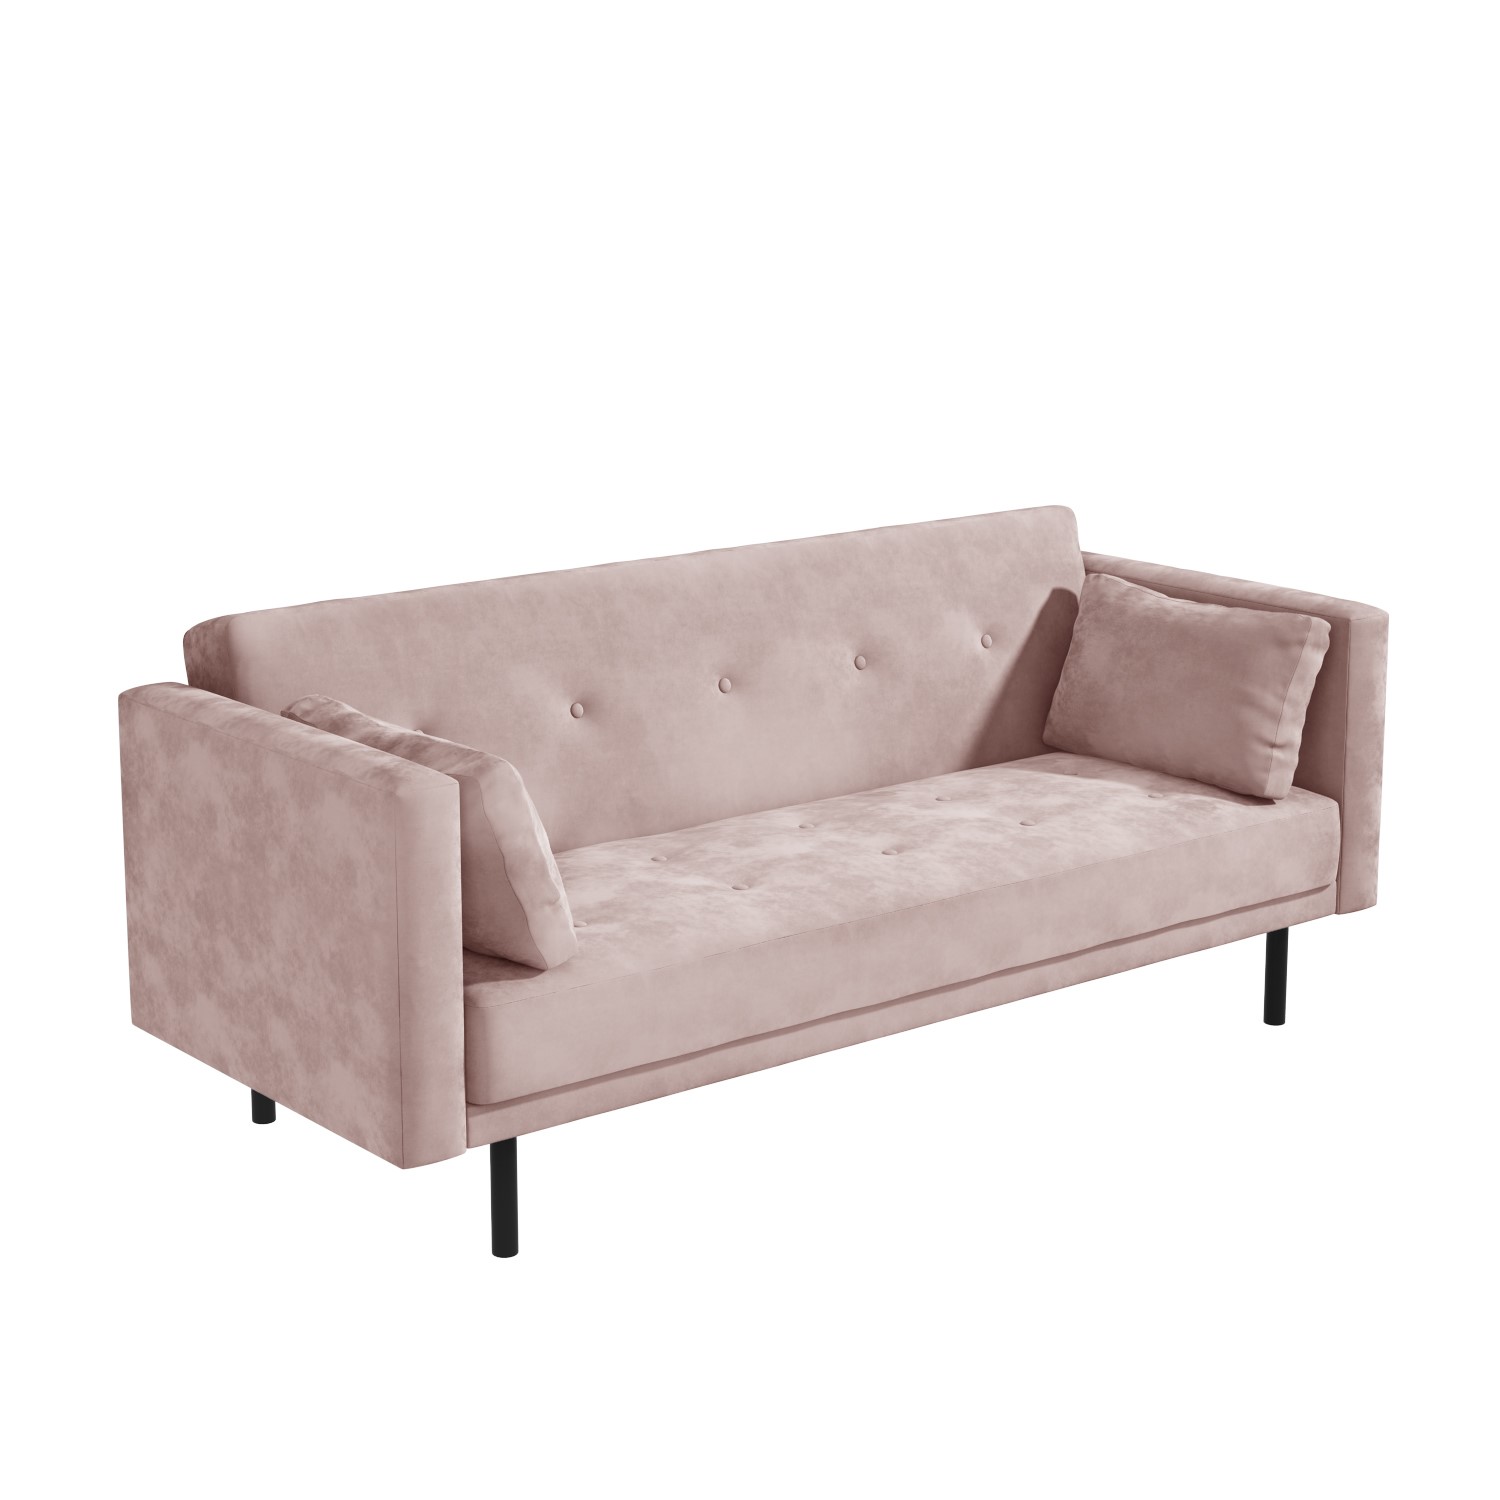 Velvet Sofa Bed In Baby Pink With, Soft Pink Sofa Bed